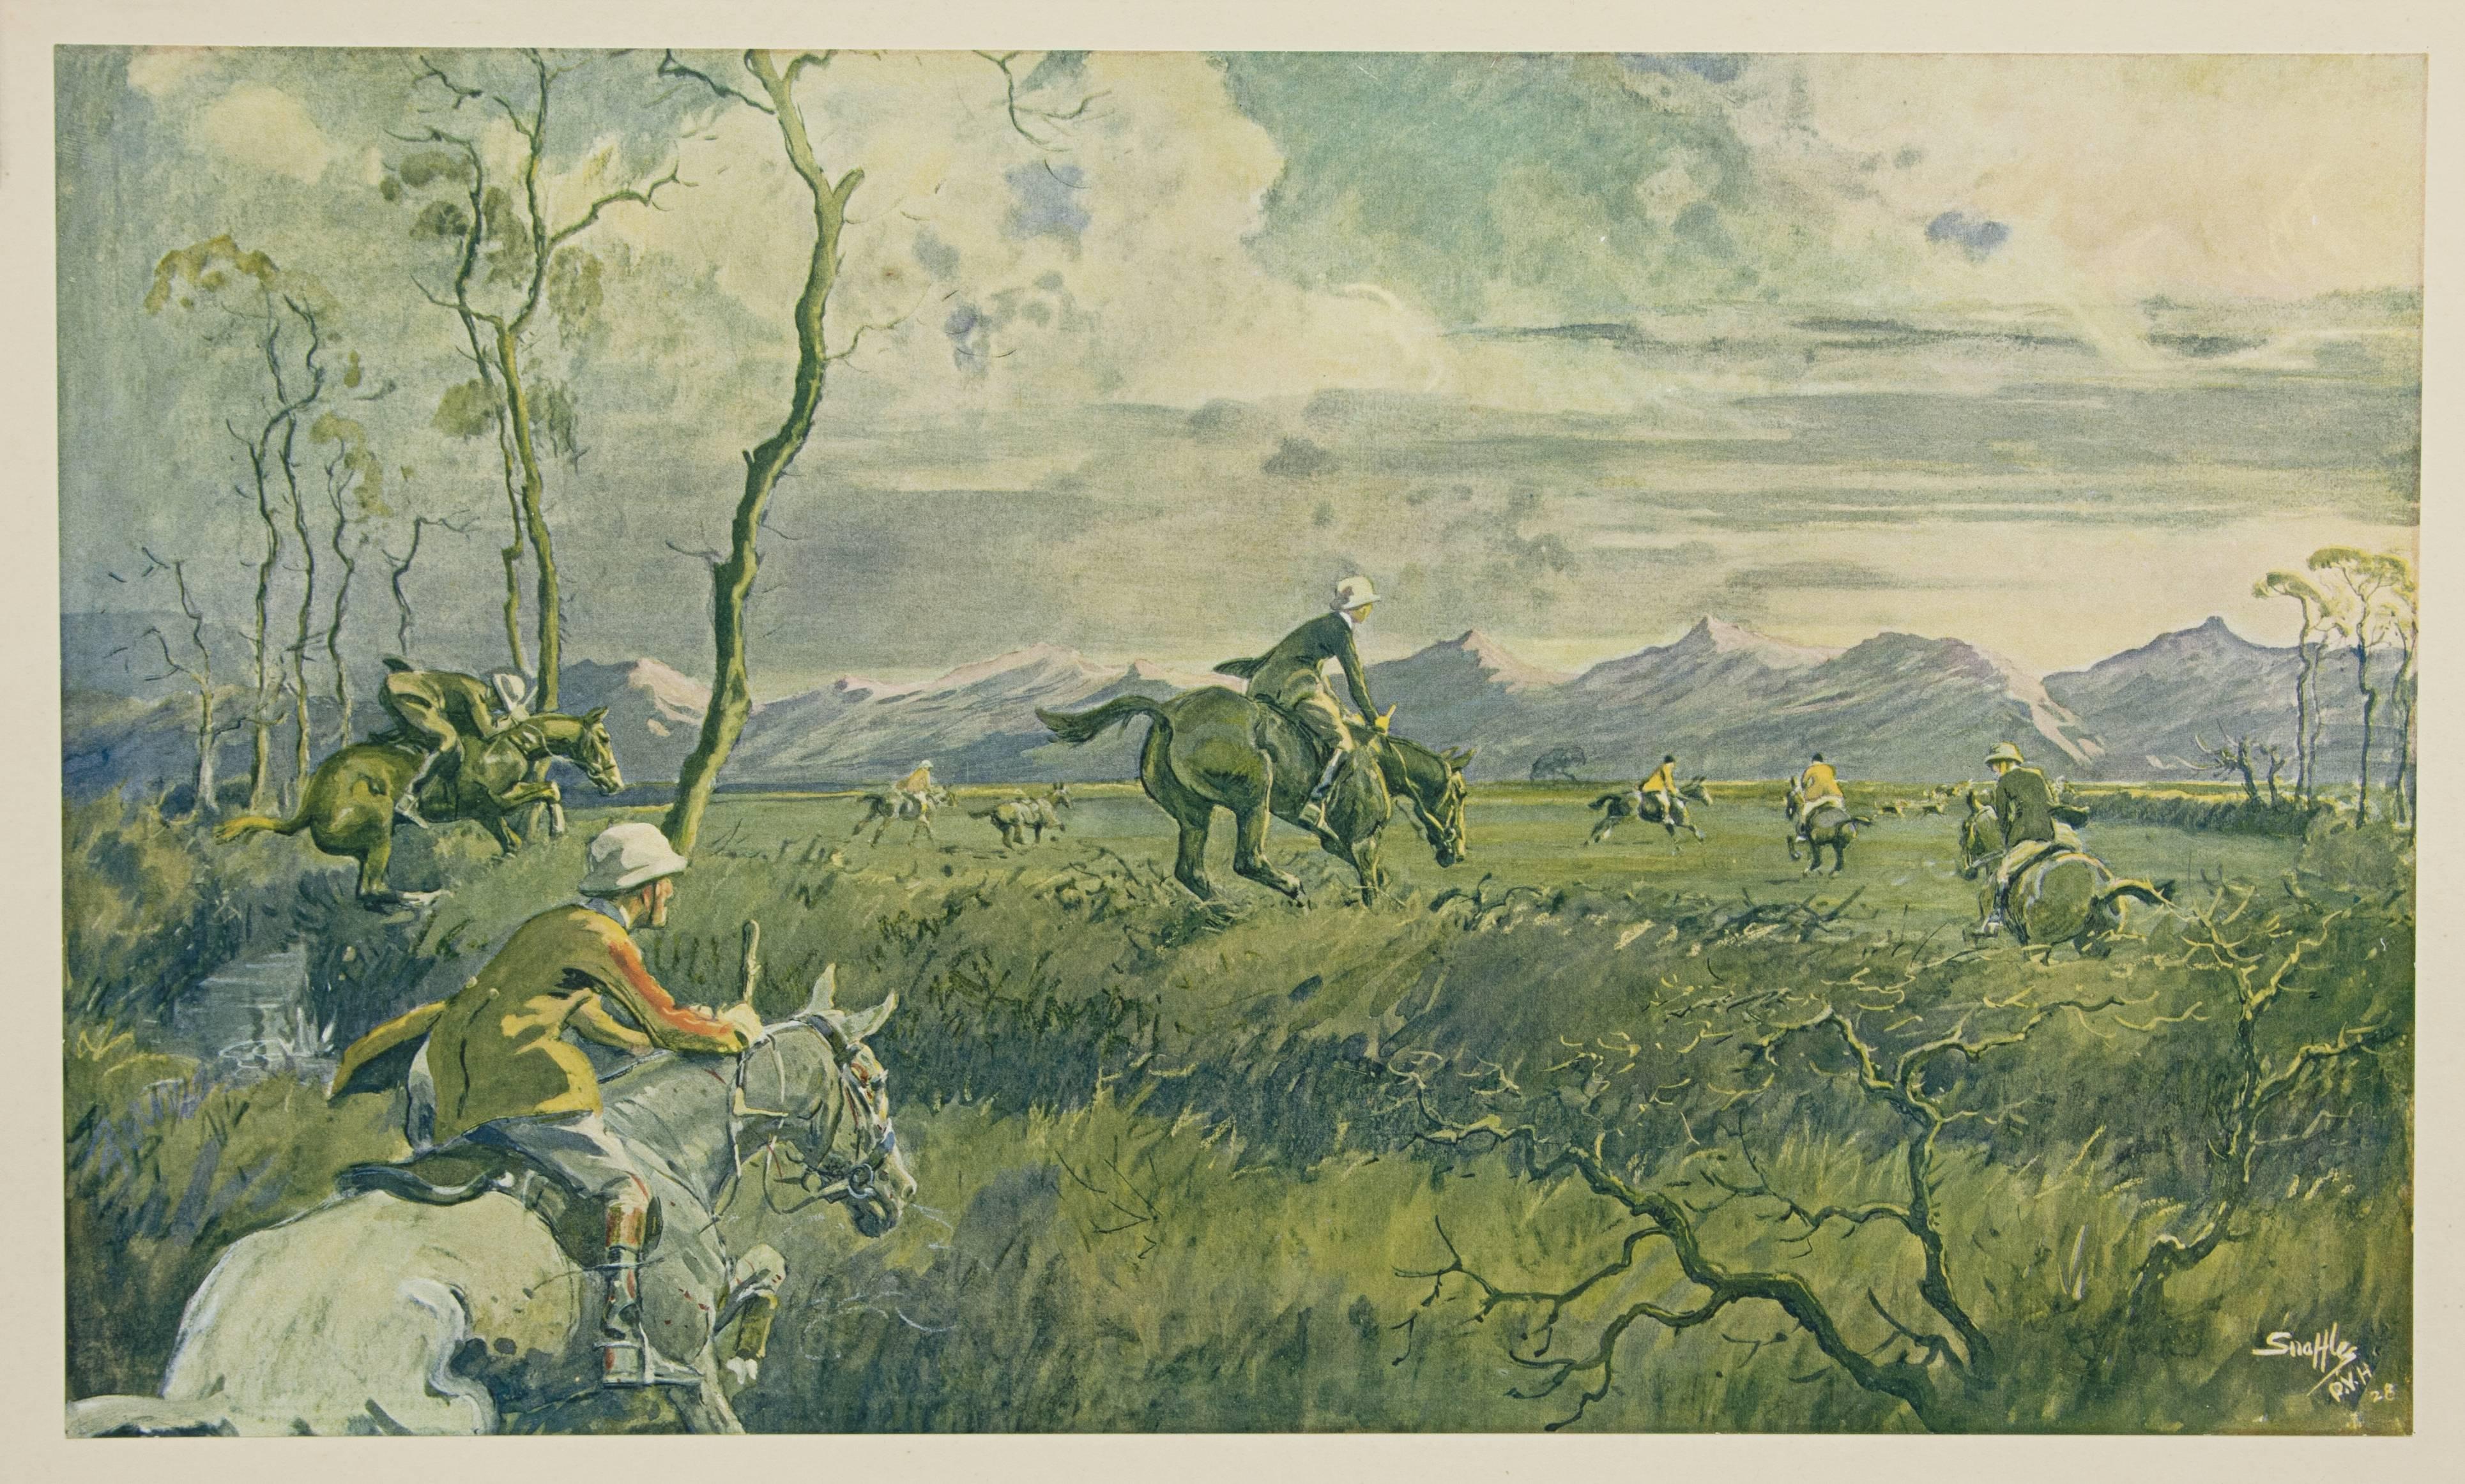 Peshawar vale hunt by Snaffles.
A good signed Snaffles Hunting print 'The Peshawar Vale Hunt'. The Snaffles hand finished lithograph depicts huntsman in solar topees galloping across the plains and jumping the Jabkinndda Drain after a jackal. The